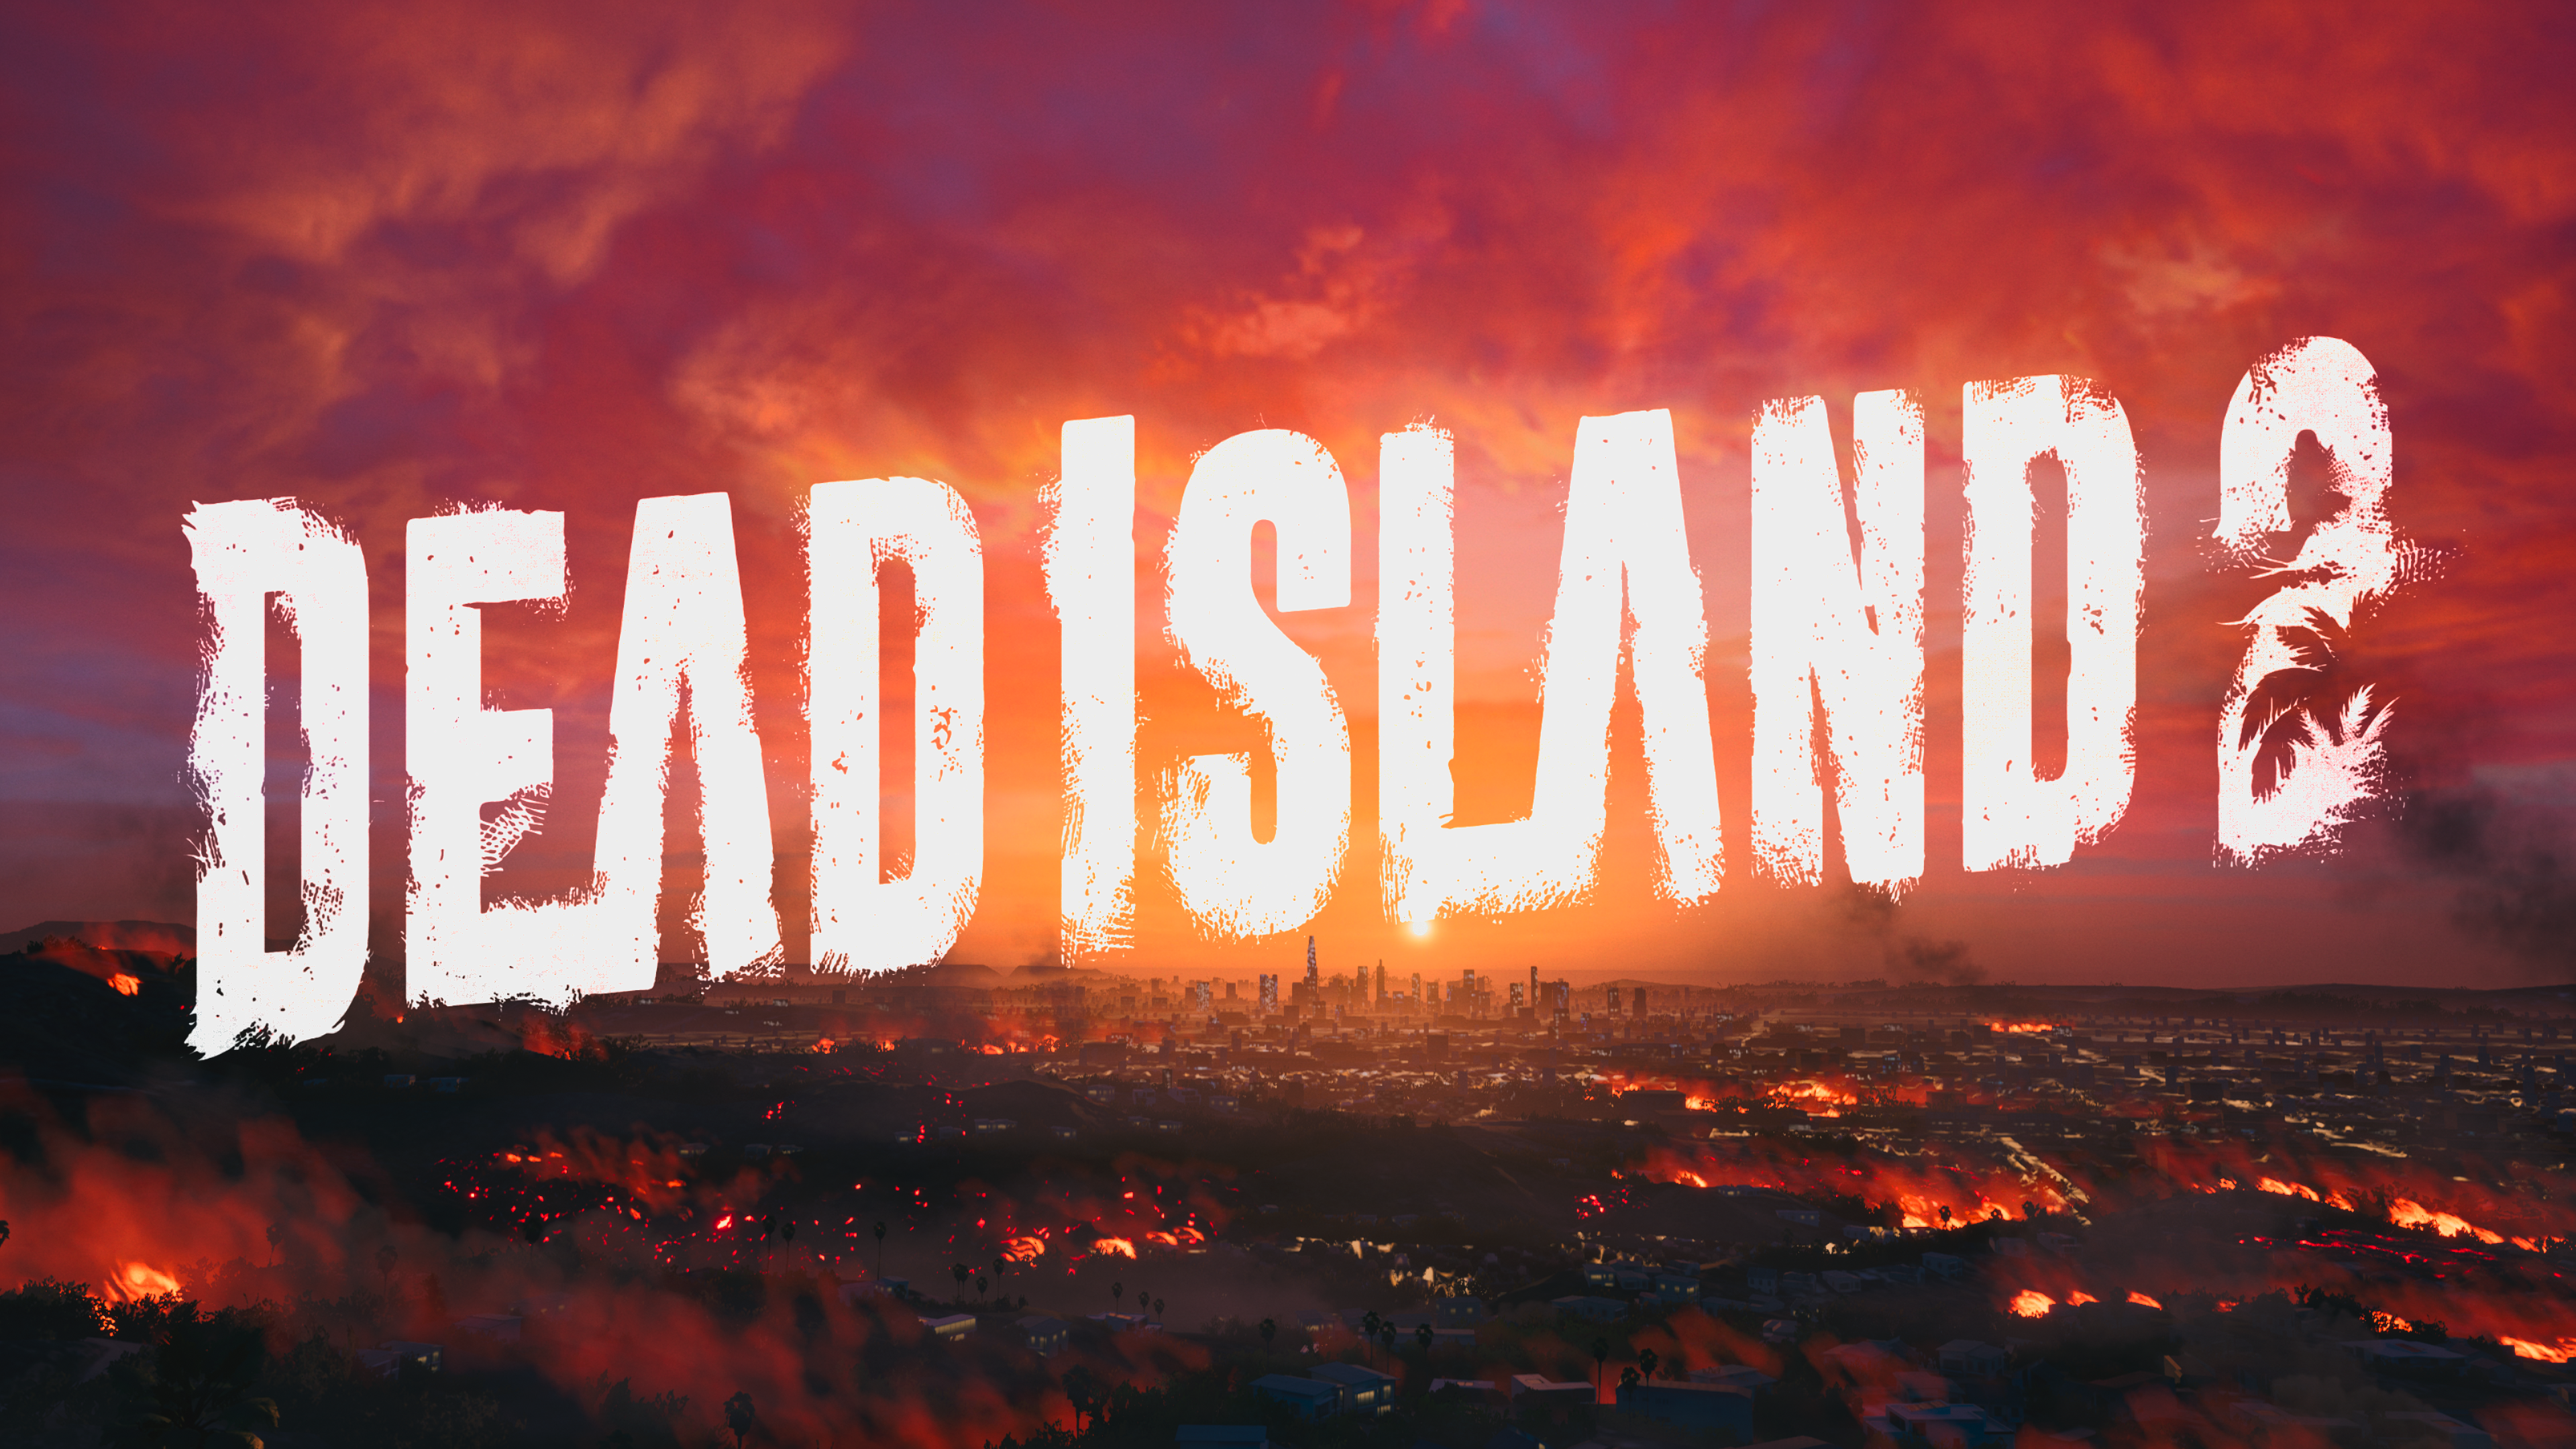 How to play Dead Island 2 multiplayer with online co-op